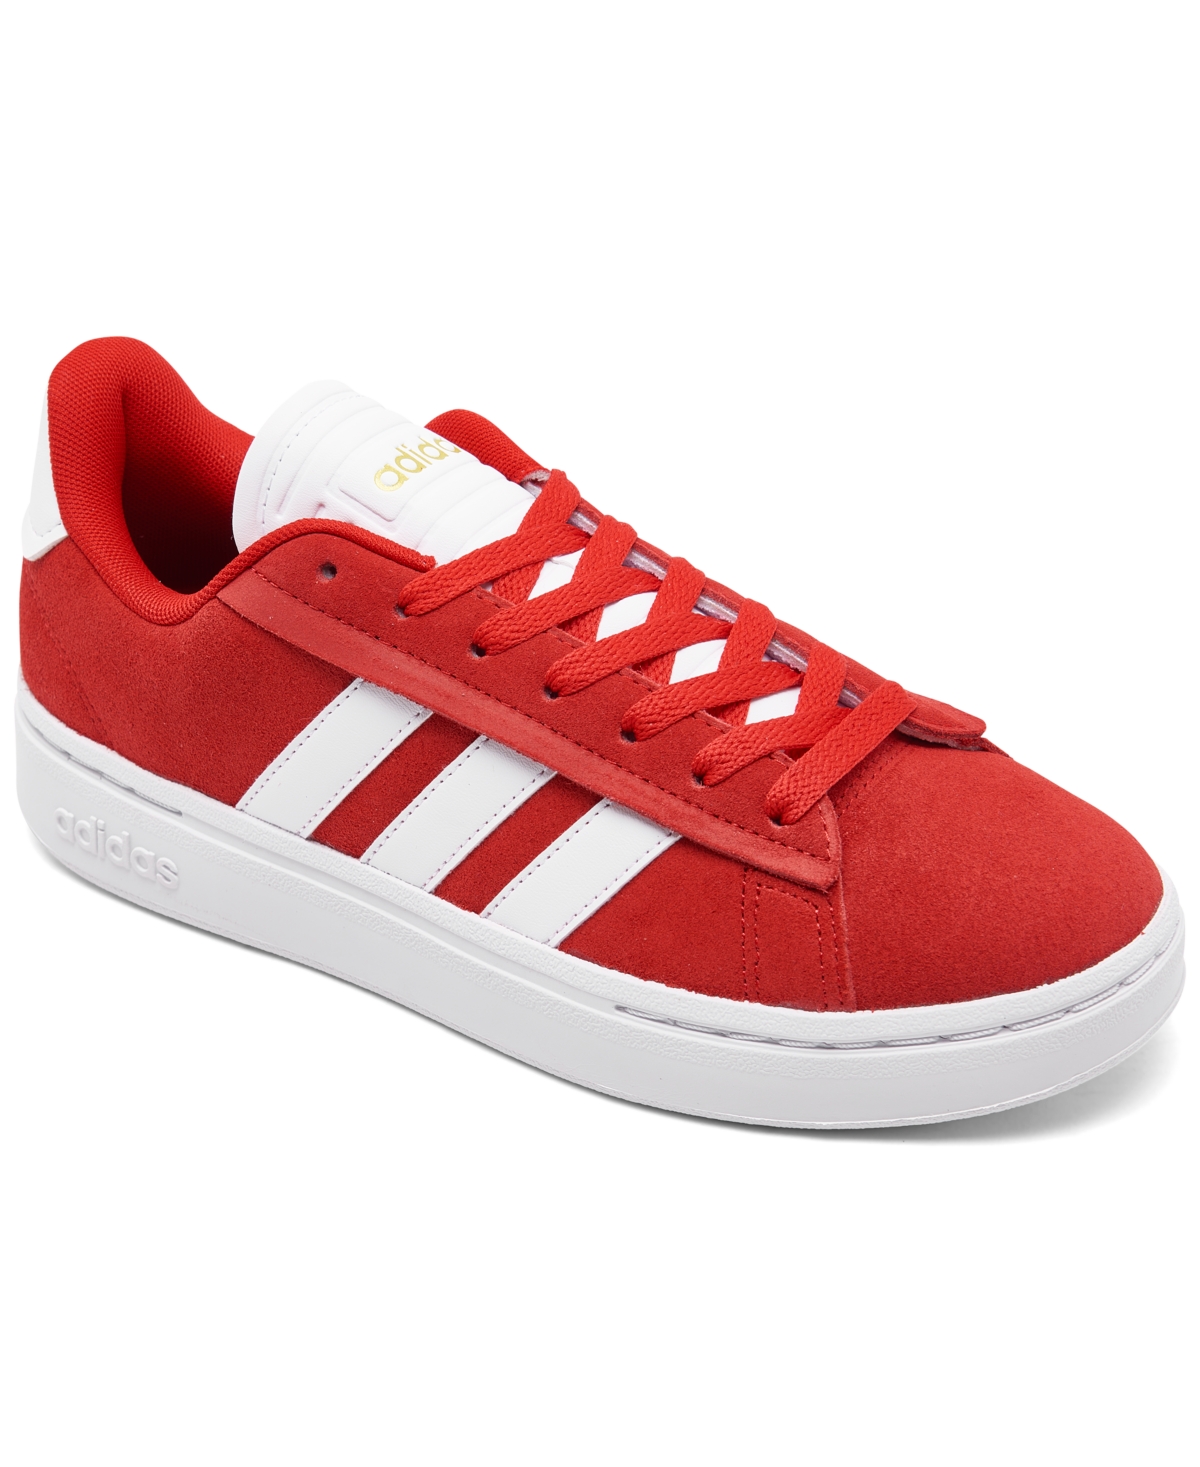 Adidas Originals Women's Grand Court Alpha Casual Sneakers From Finish Line In Better Scarlet,footwear